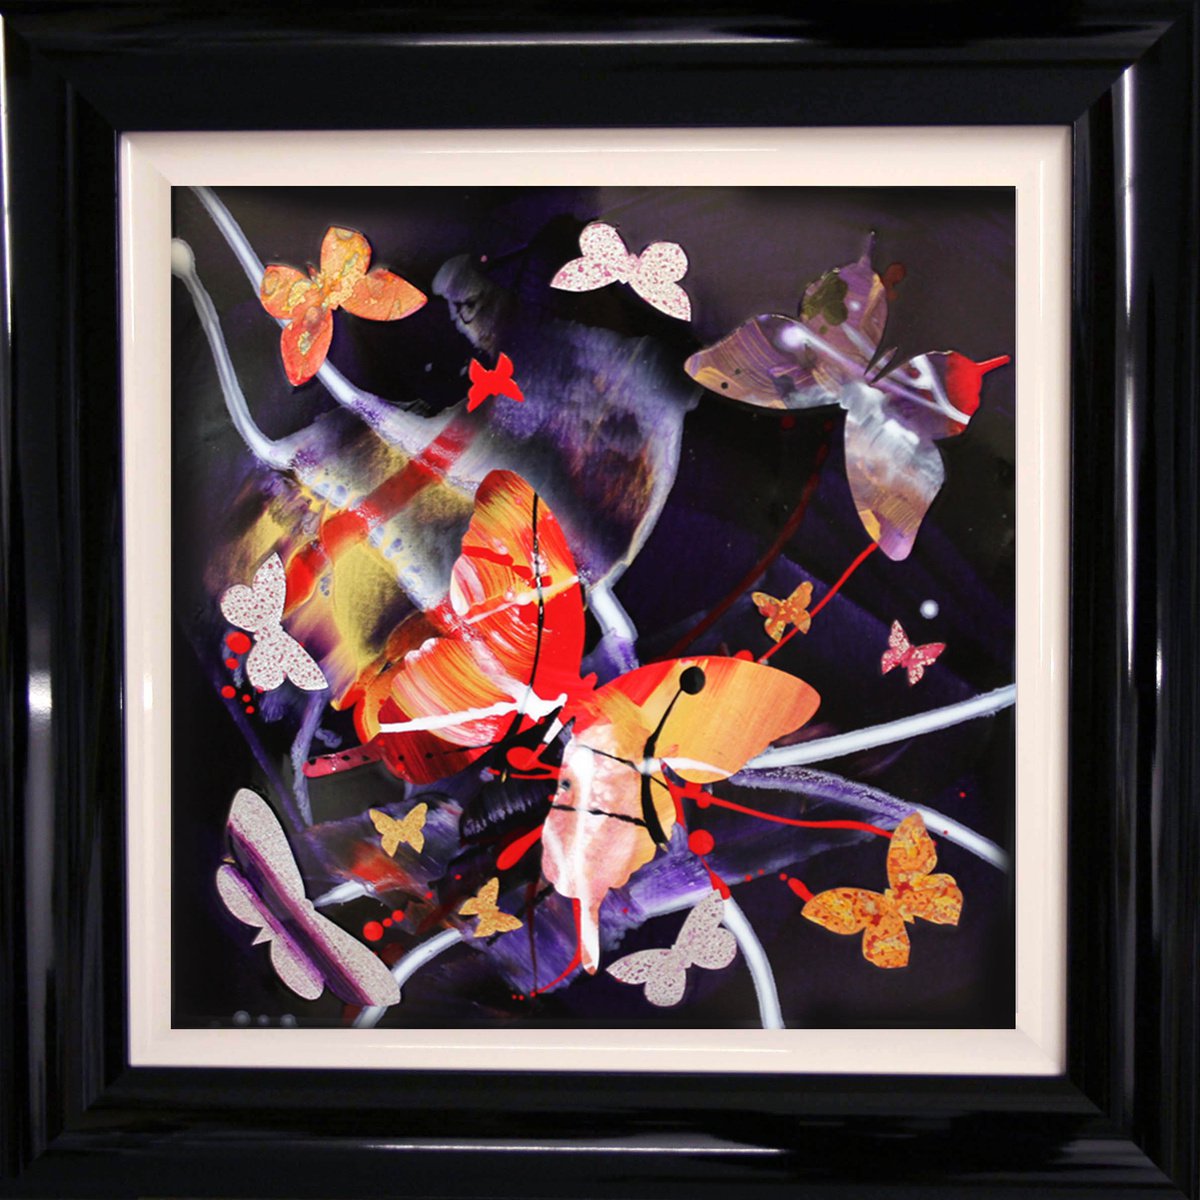 BUTTERFLY COLLAGE/Every Day Angels (framed) by Paresh Nrshinga